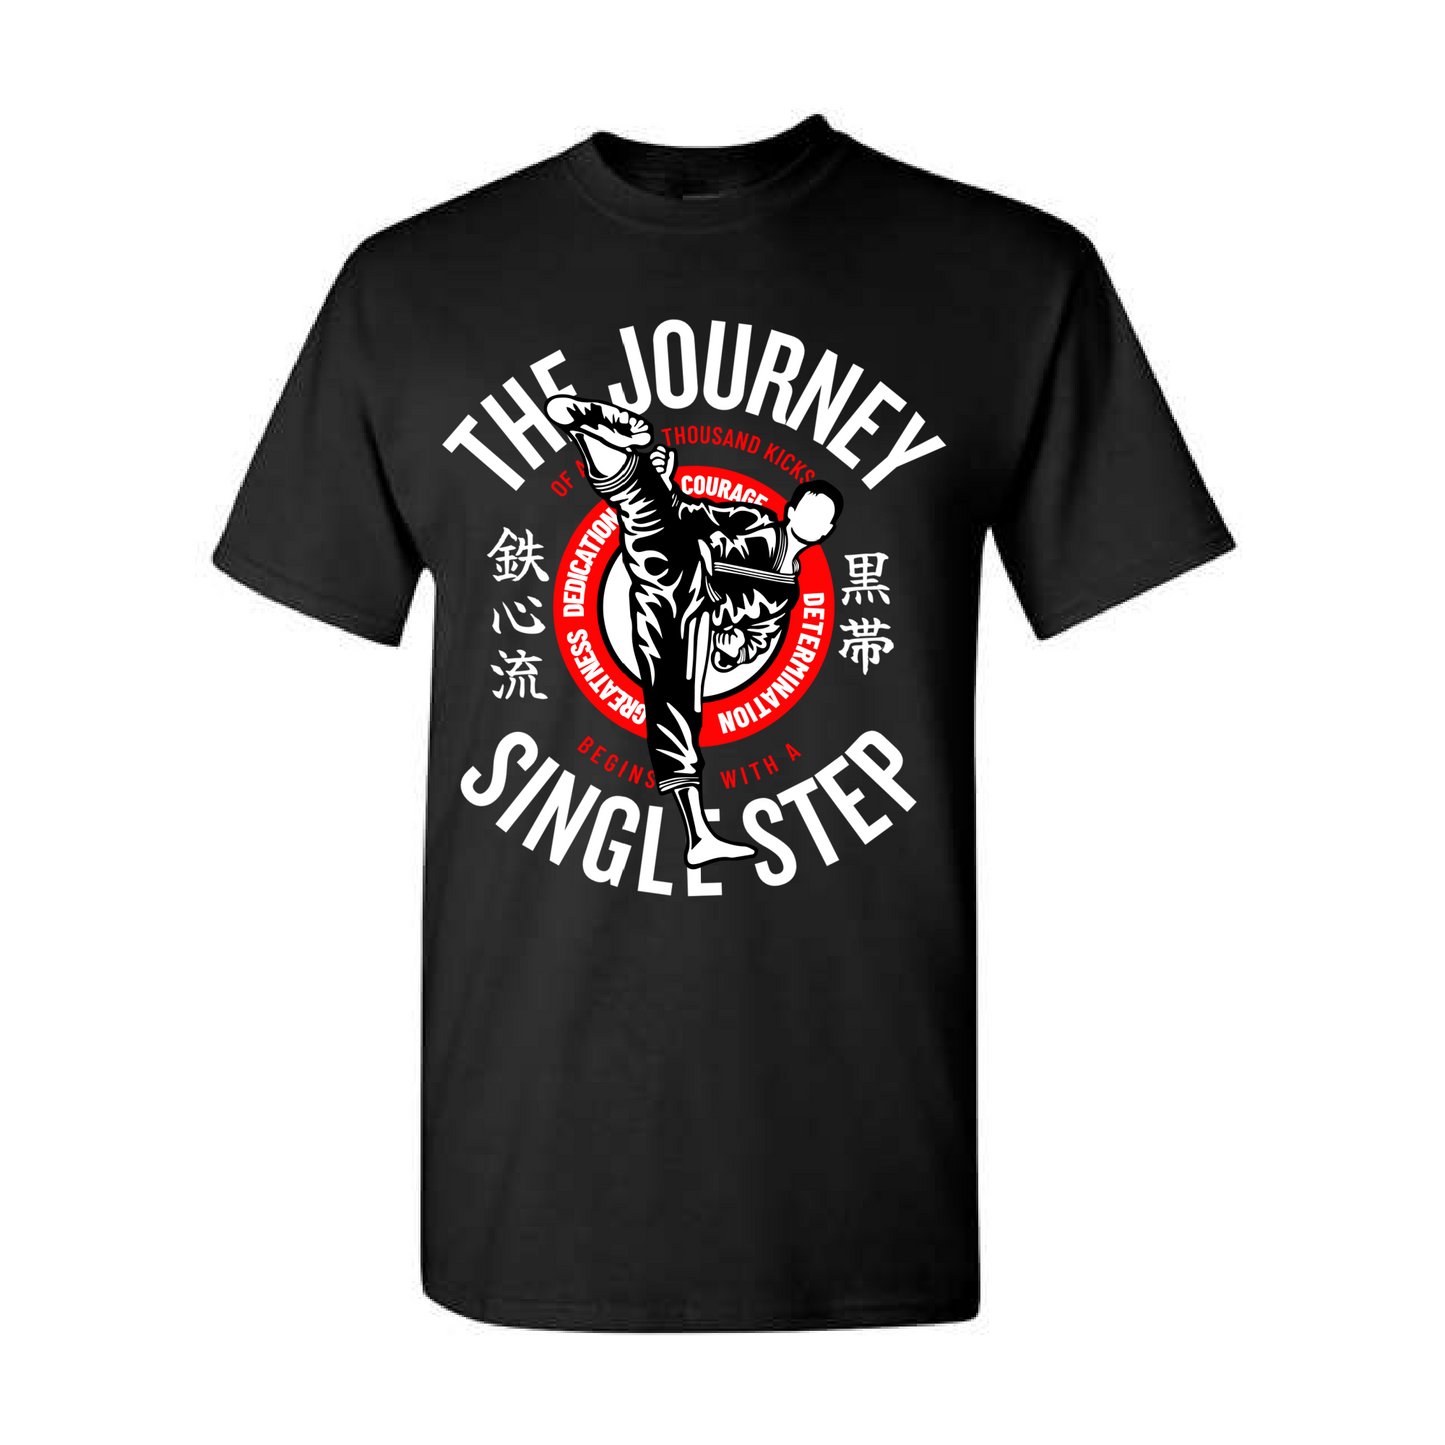 "Journey Begins with a Single Step" Shirt